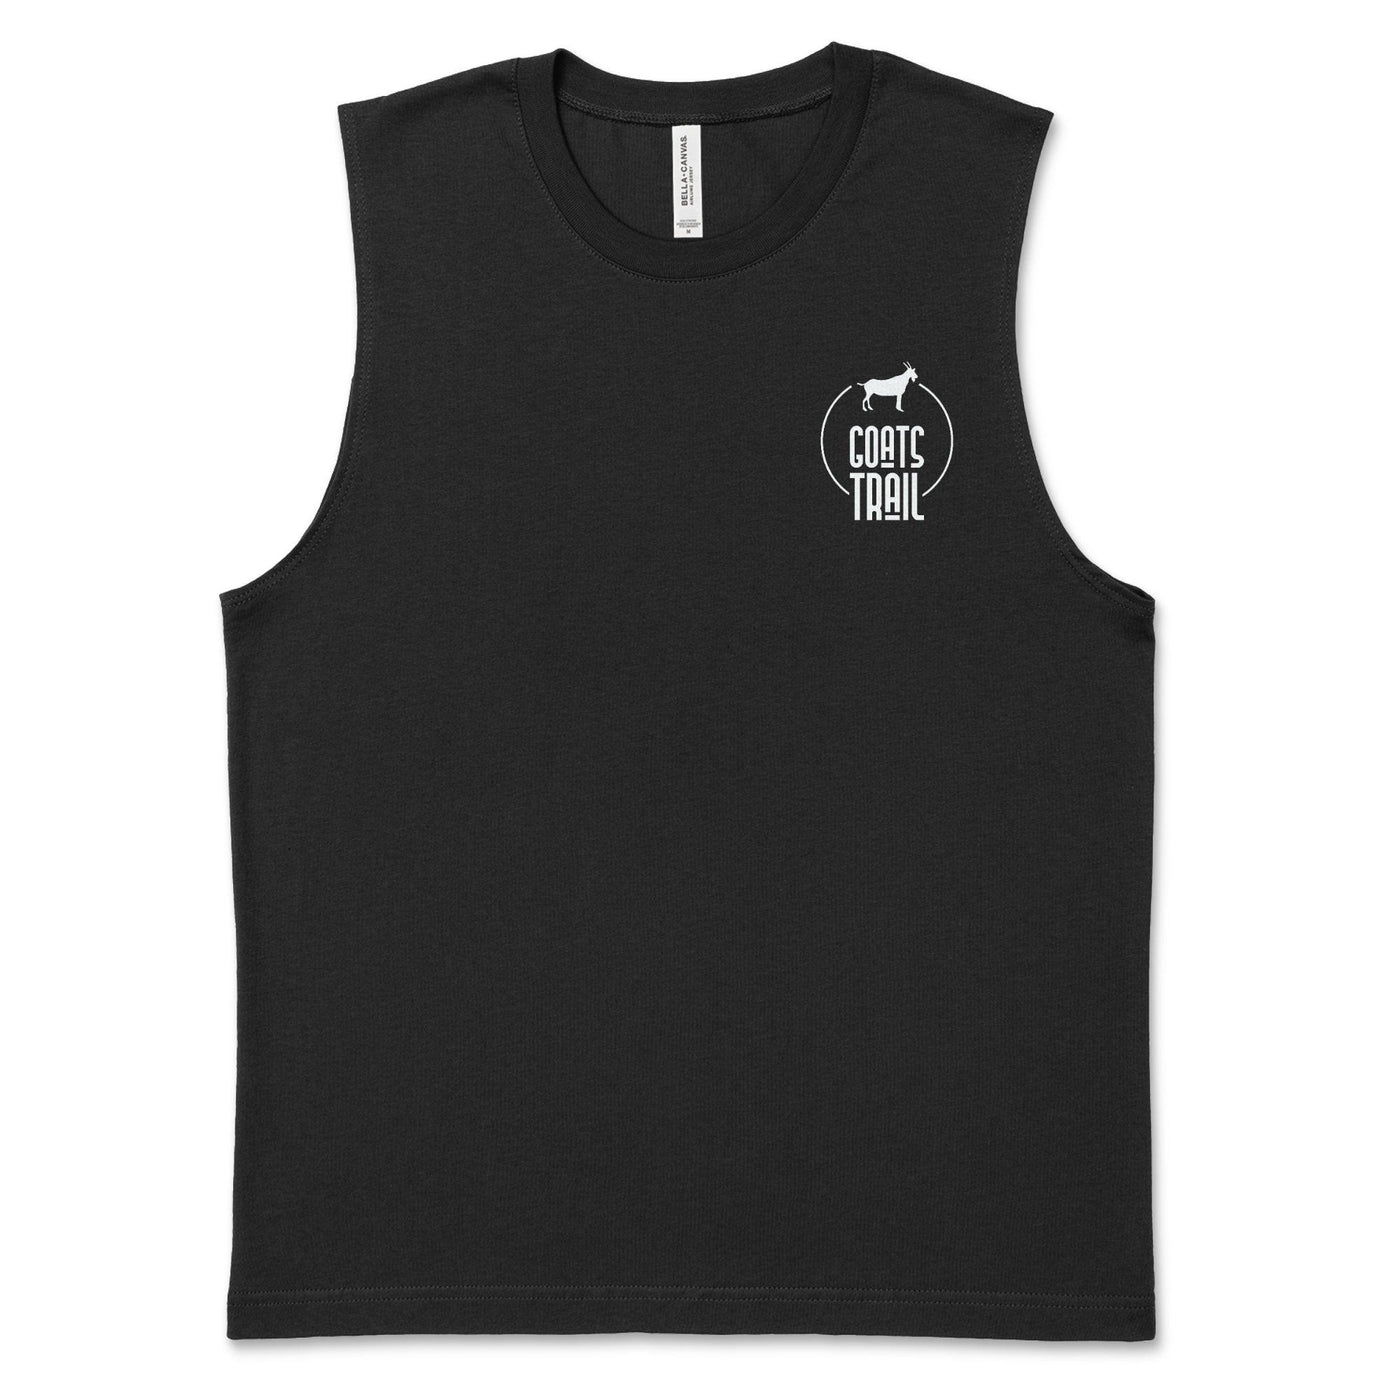 Men's Off-Road 4Runner Muscle Tank Top - Goats Trail